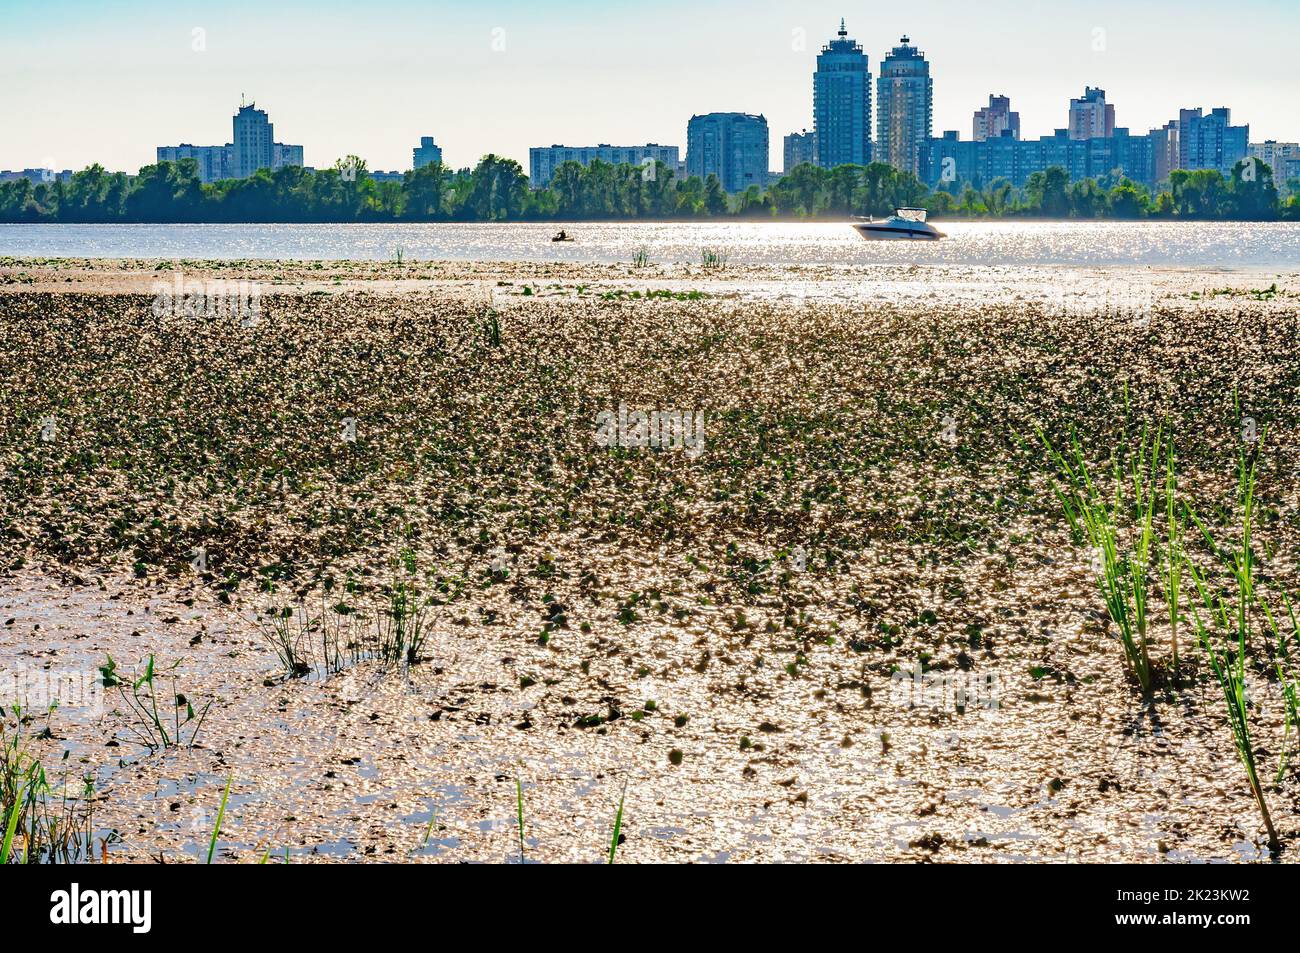 The buildings of the Obolon district, across the Dnieper River in Kiev, Ukraine, seen from Muromets Park. Stock Photo